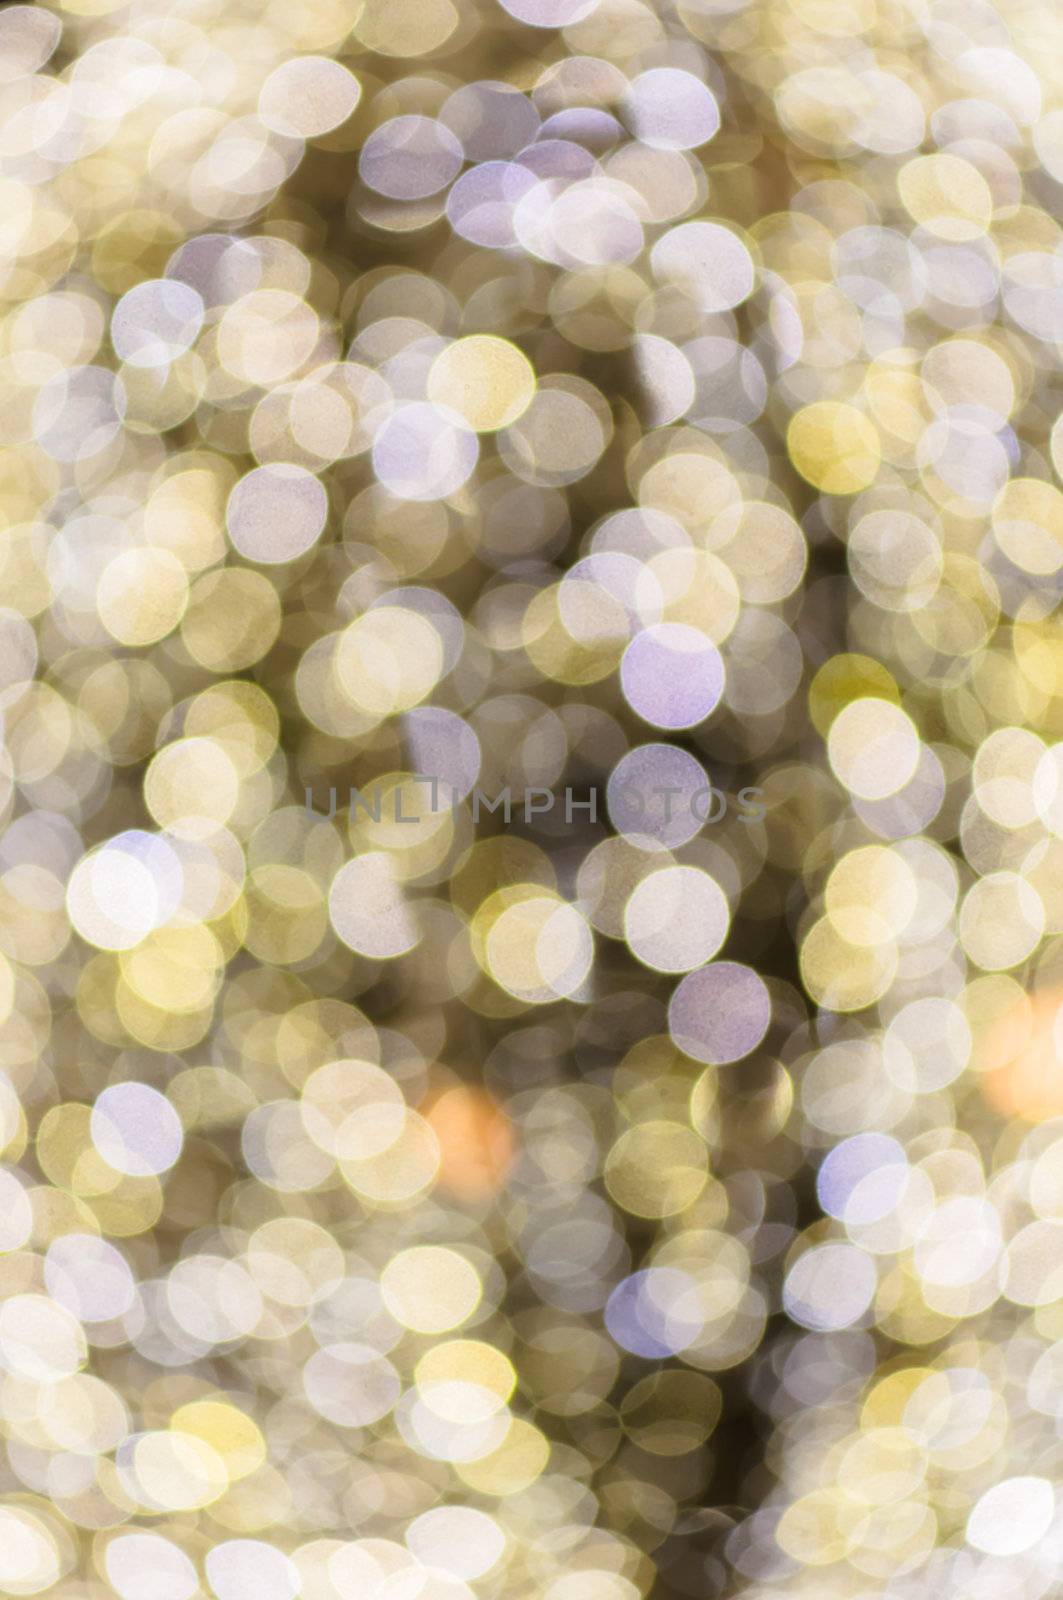 Out of focus dots bckground